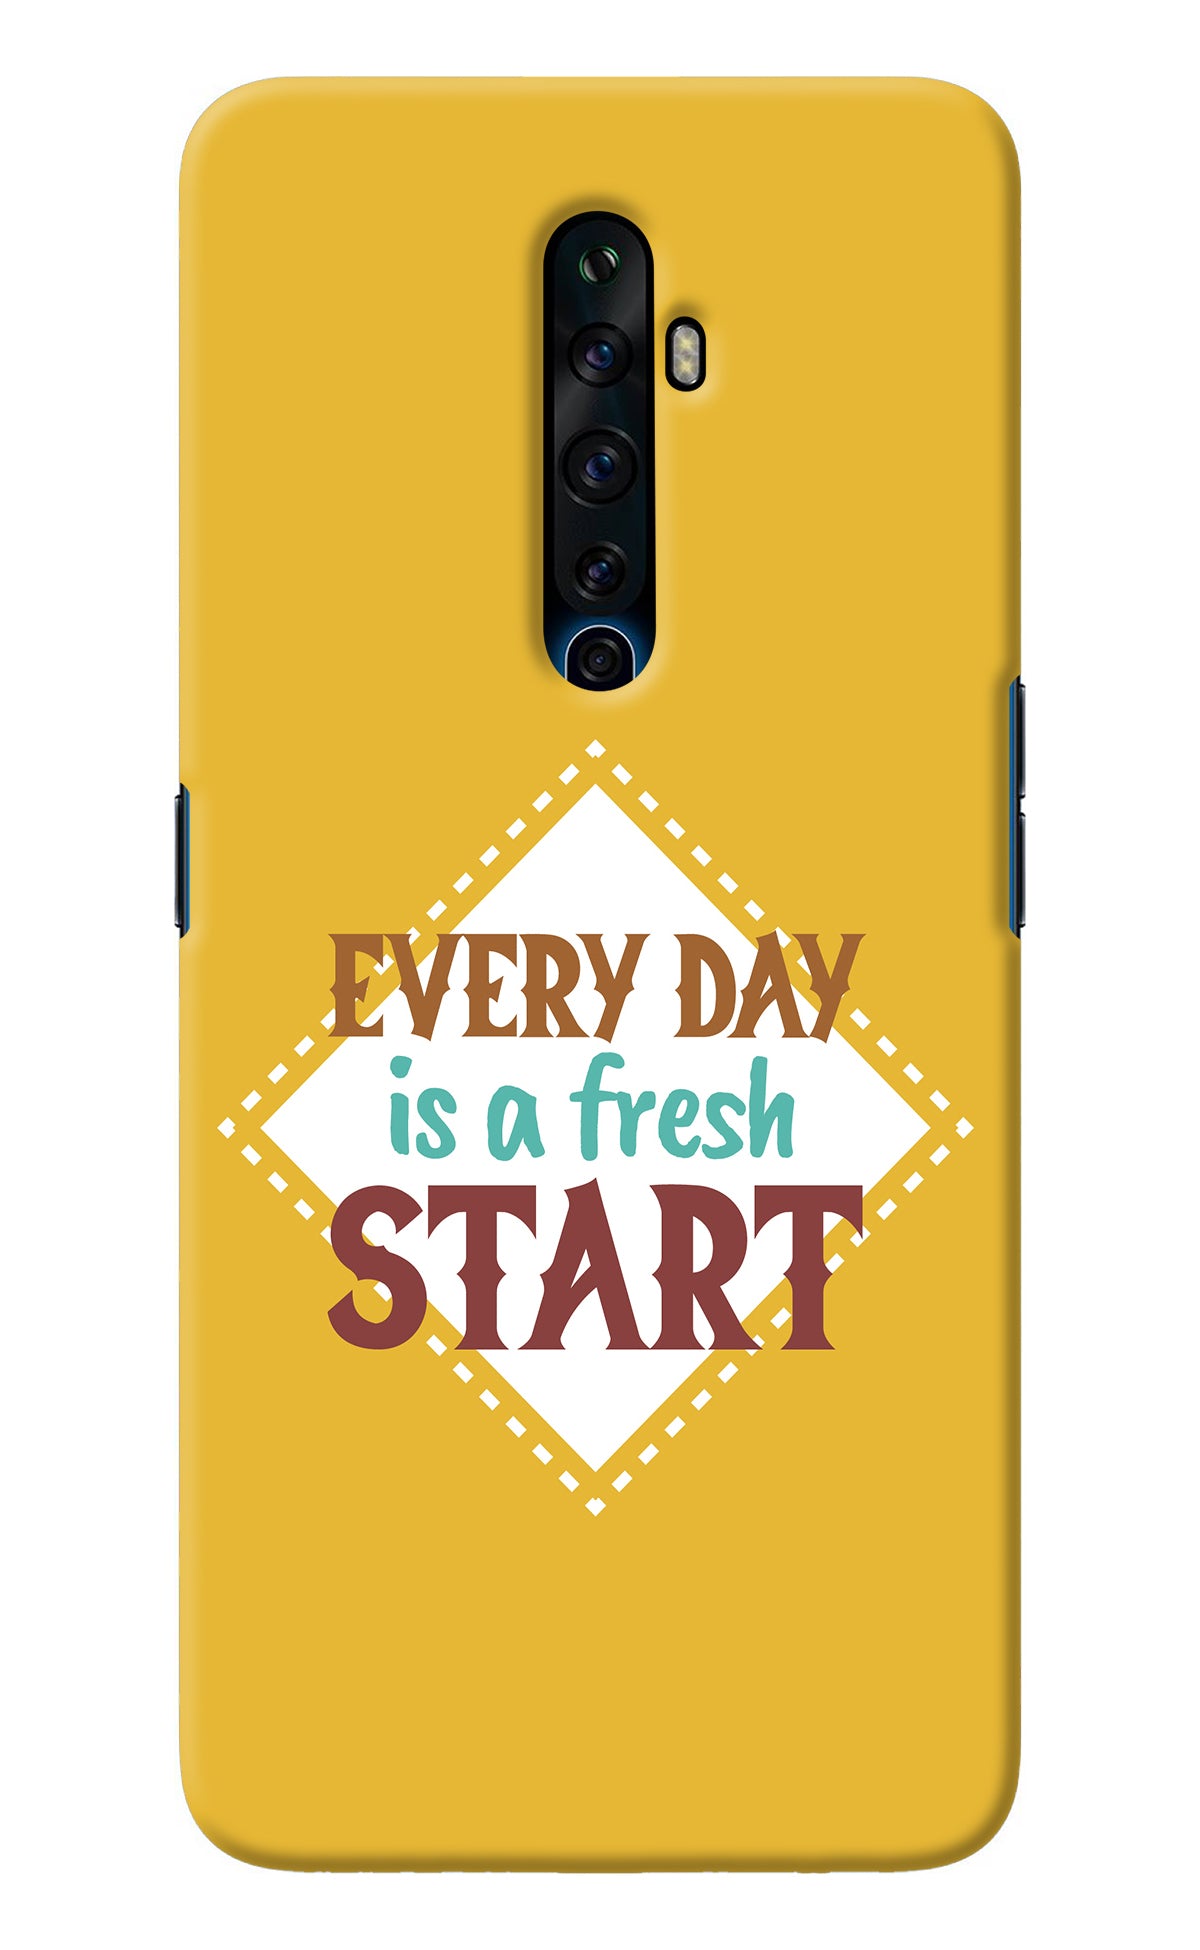 Every day is a Fresh Start Oppo Reno2 Z Back Cover